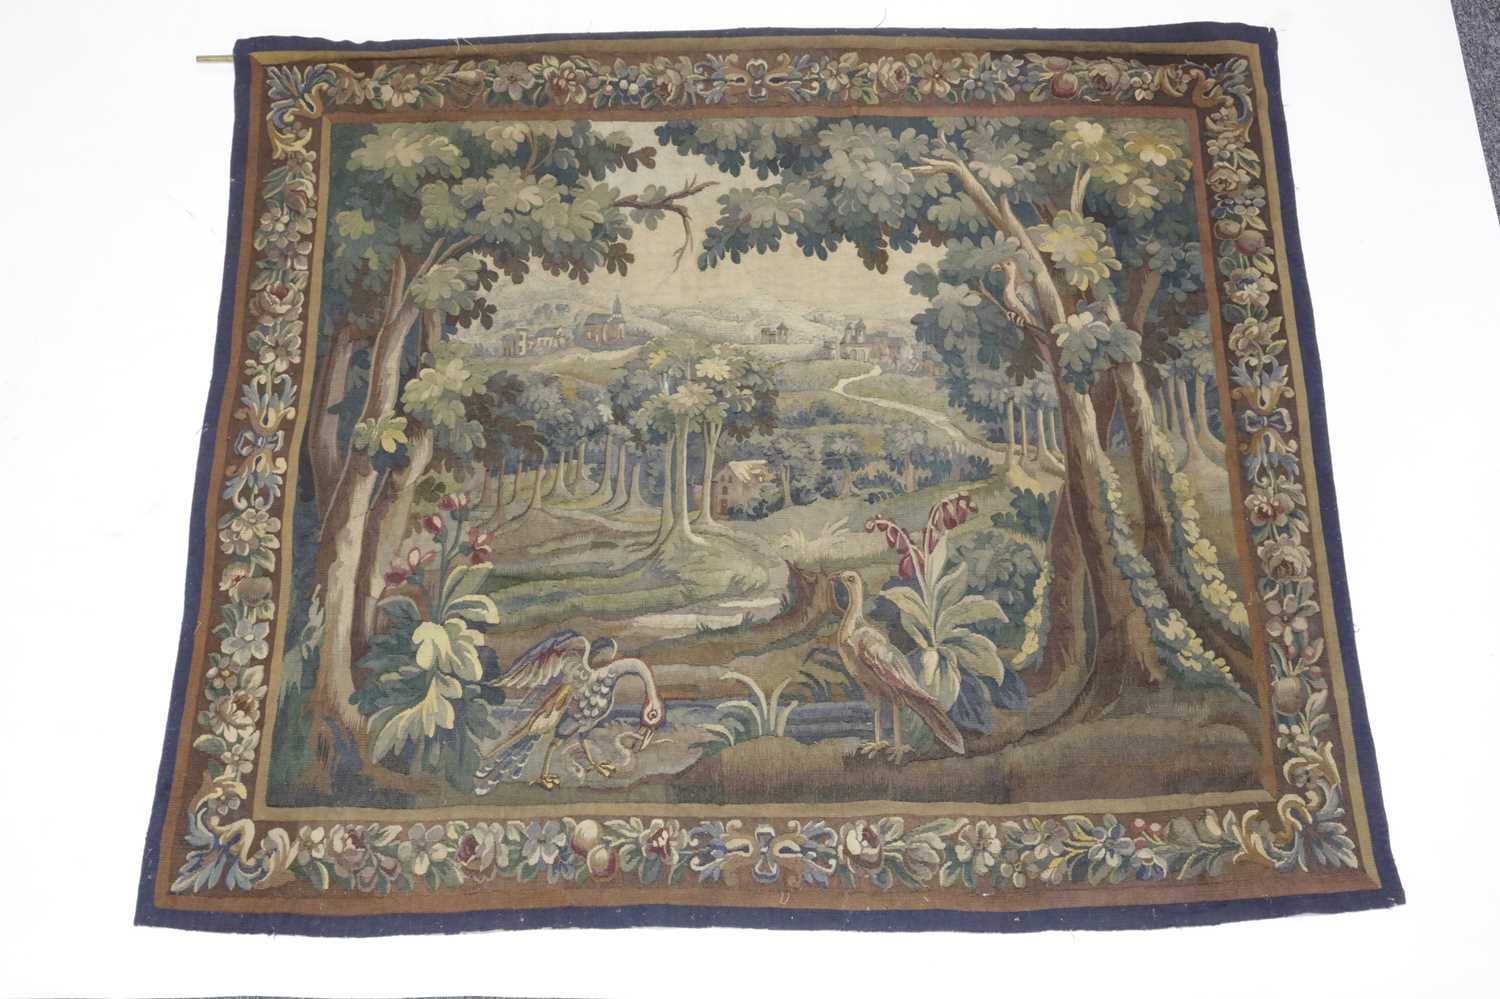 AN AUBUSSON TAPESTRY FRENCH, LATE 18TH / EARLY 19TH CENTURY worked in silks and wool, depicting a